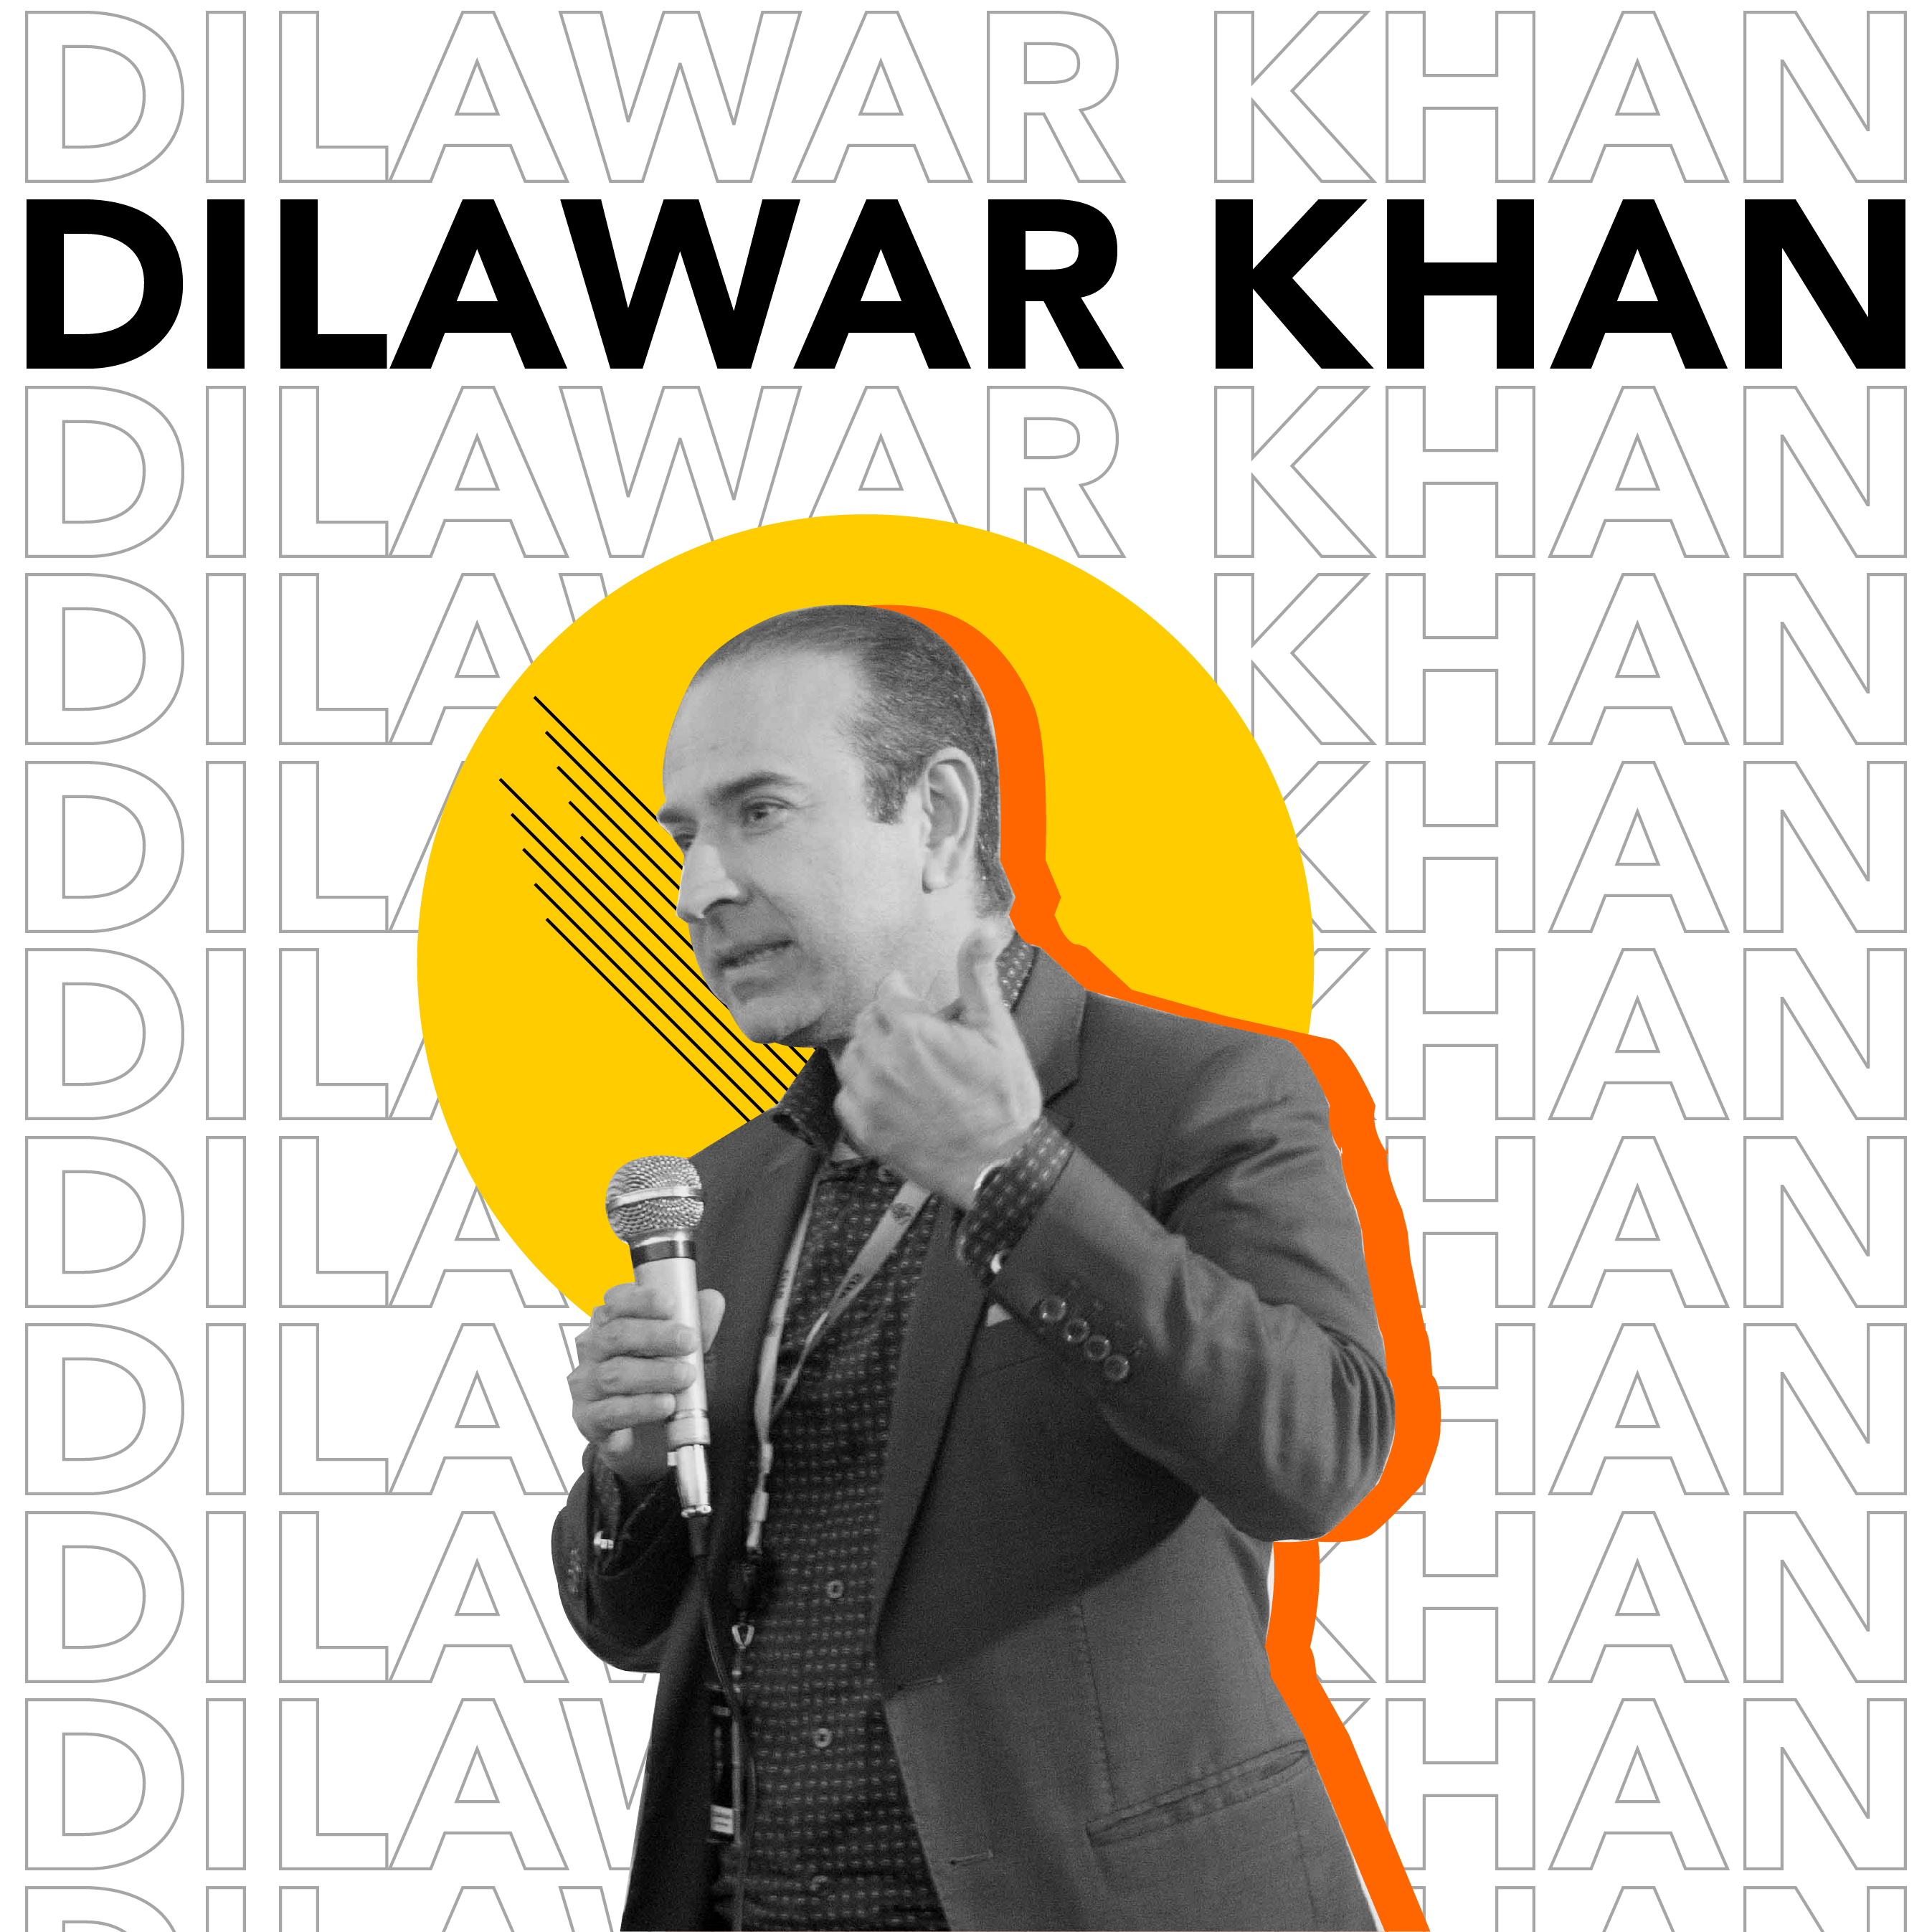 THE POSSIBILITIES ARE ENDLESS – Dilawar Khan